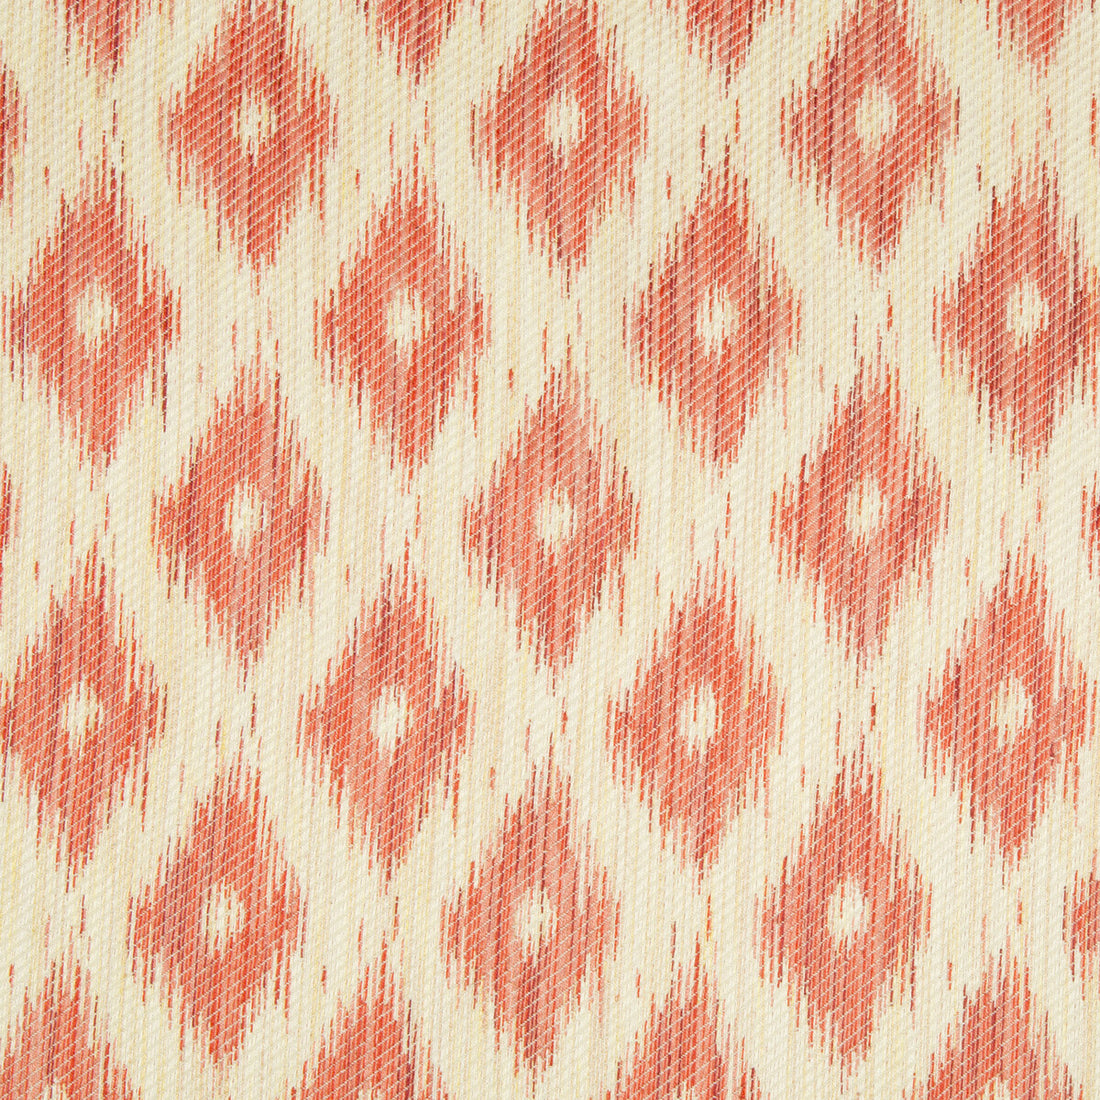 Viceroy Strie II fabric in rose color - pattern 8017139.717.0 - by Brunschwig &amp; Fils in the Baronet collection